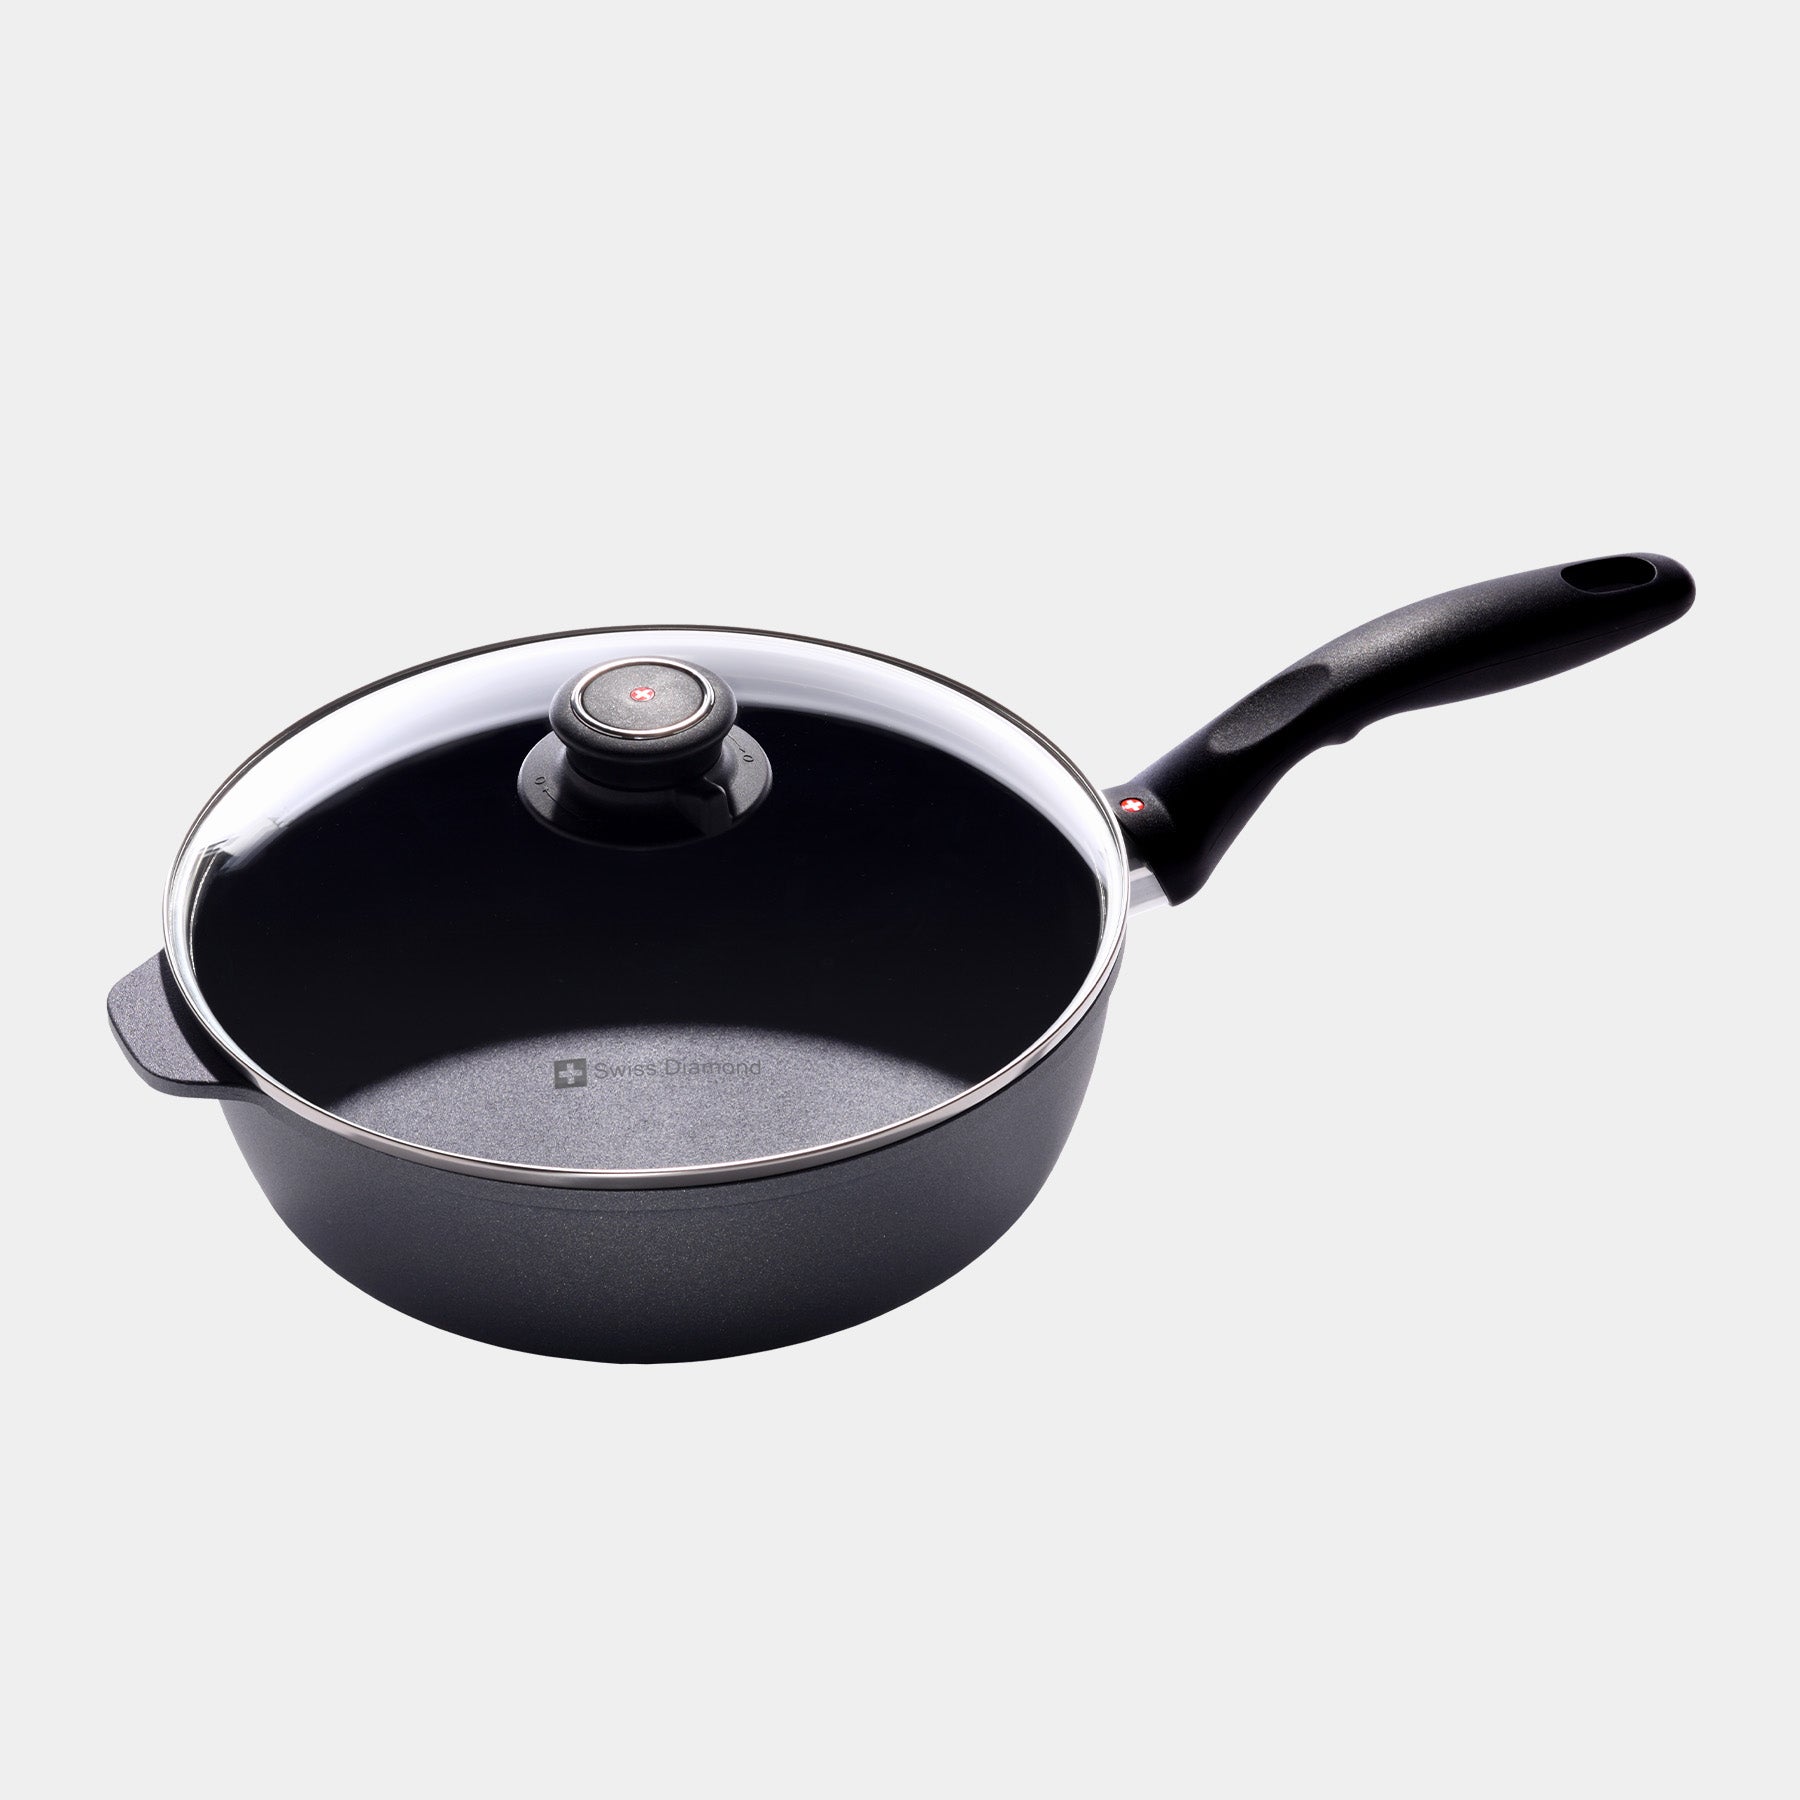 HD Nonstick 3.2 qt Saute Pan with Glass Lid - Induction